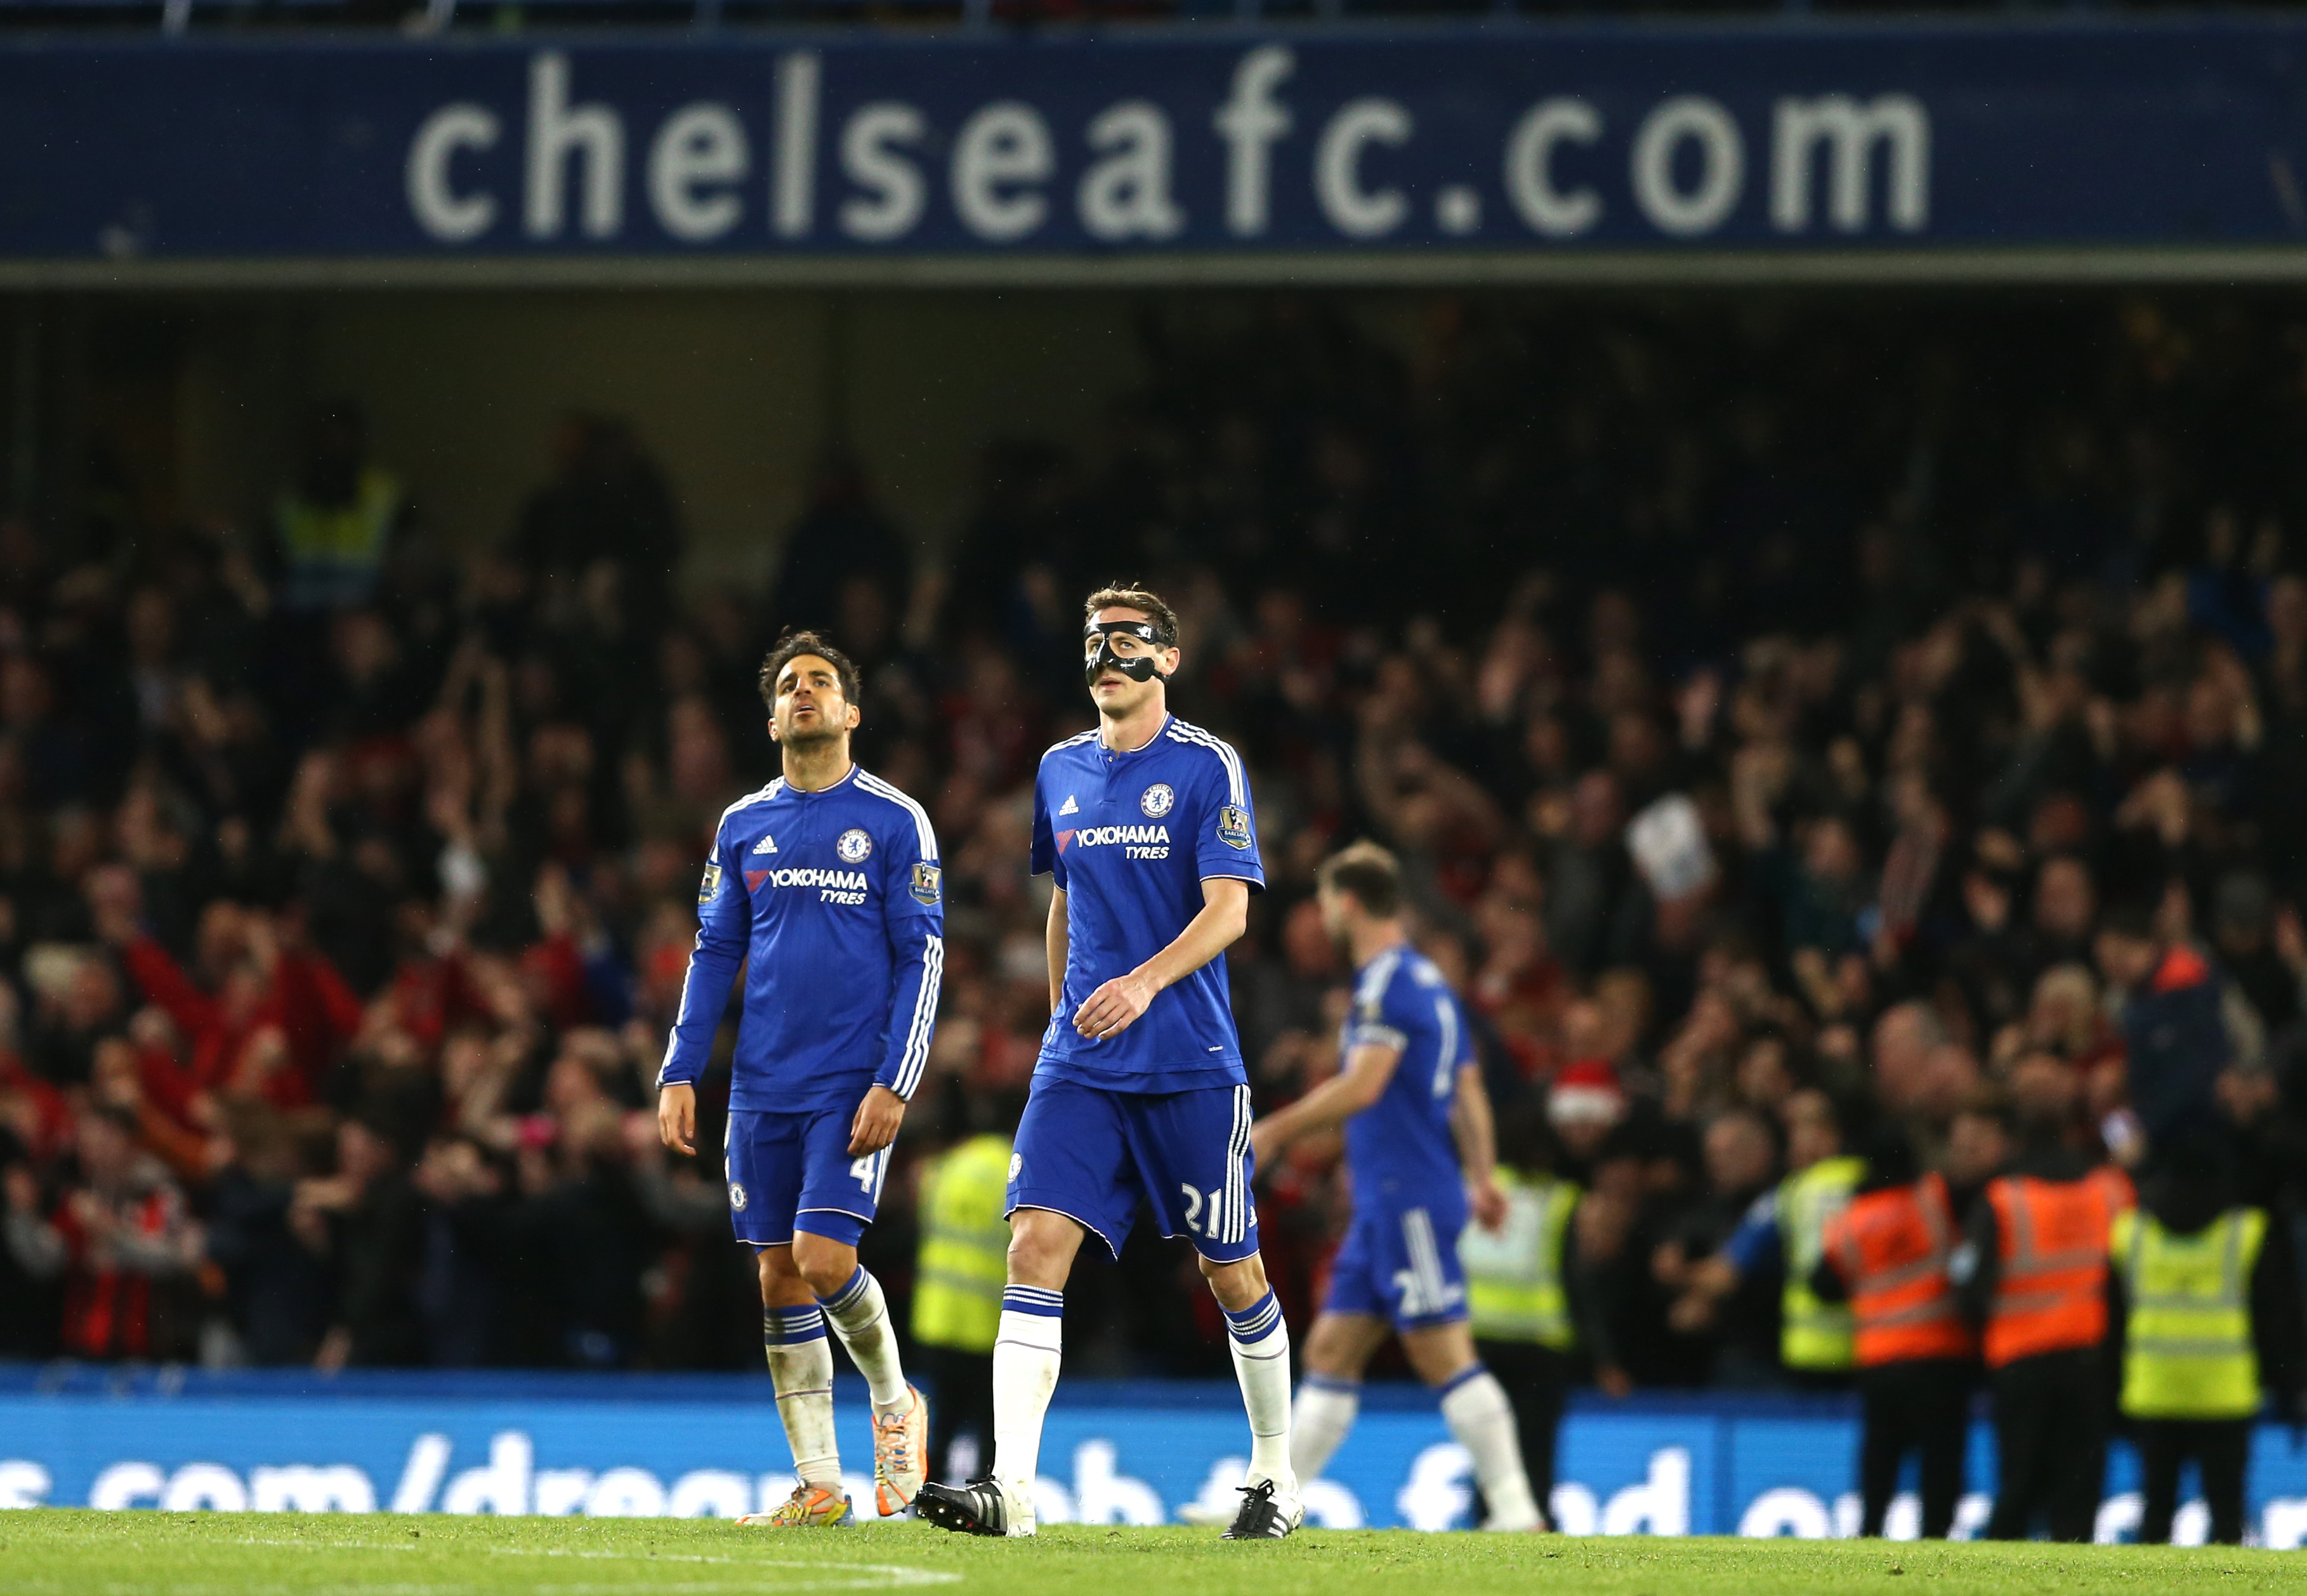 Chelsea's Spanish midfielder Cesc Fabregas and Chelsea's Serbian midfielder Nemanja Matic (R) react after Bournemouth scored during the English Premier League football match between Chelsea and Bournemouth at Stamford Bridge in London on December 5, 2015. AFP PHOTO / JUSTIN TALLIS RESTRICTED TO EDITORIAL USE. No use with unauthorized audio, video, data, fixture lists, club/league logos or 'live' services. Online in-match use limited to 75 images, no video emulation. No use in betting, games or single club/league/player publications. / AFP / JUSTIN TALLIS (Photo credit should read JUSTIN TALLIS/AFP/Getty Images)